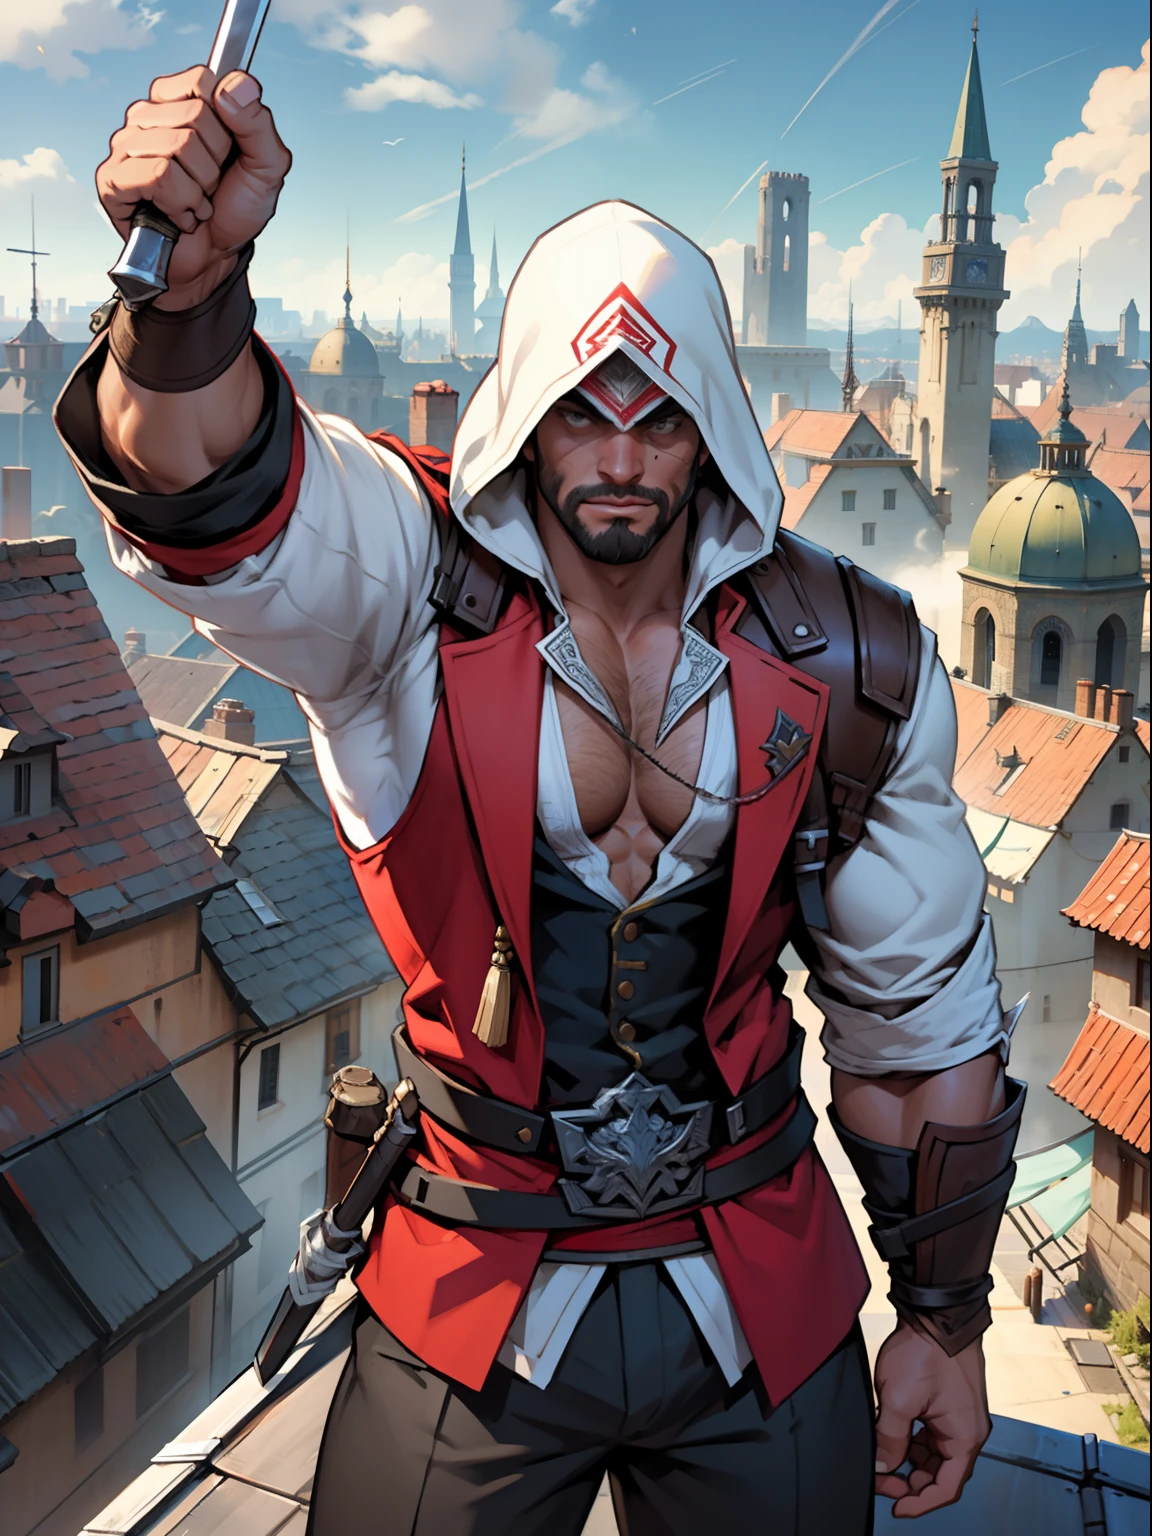 30 years old, male, assassin's creed, standing on top of a roof, panoramic view of the entire city, stubble, huge muscles, mature man, muscle swelling, bodybuilding, chest muscles, abs, natural light, 1man, steam punk, the dark ages, ancient European city, full body, assassin's creed outfit, raising arms to the sky, daggers and weapons as accessories